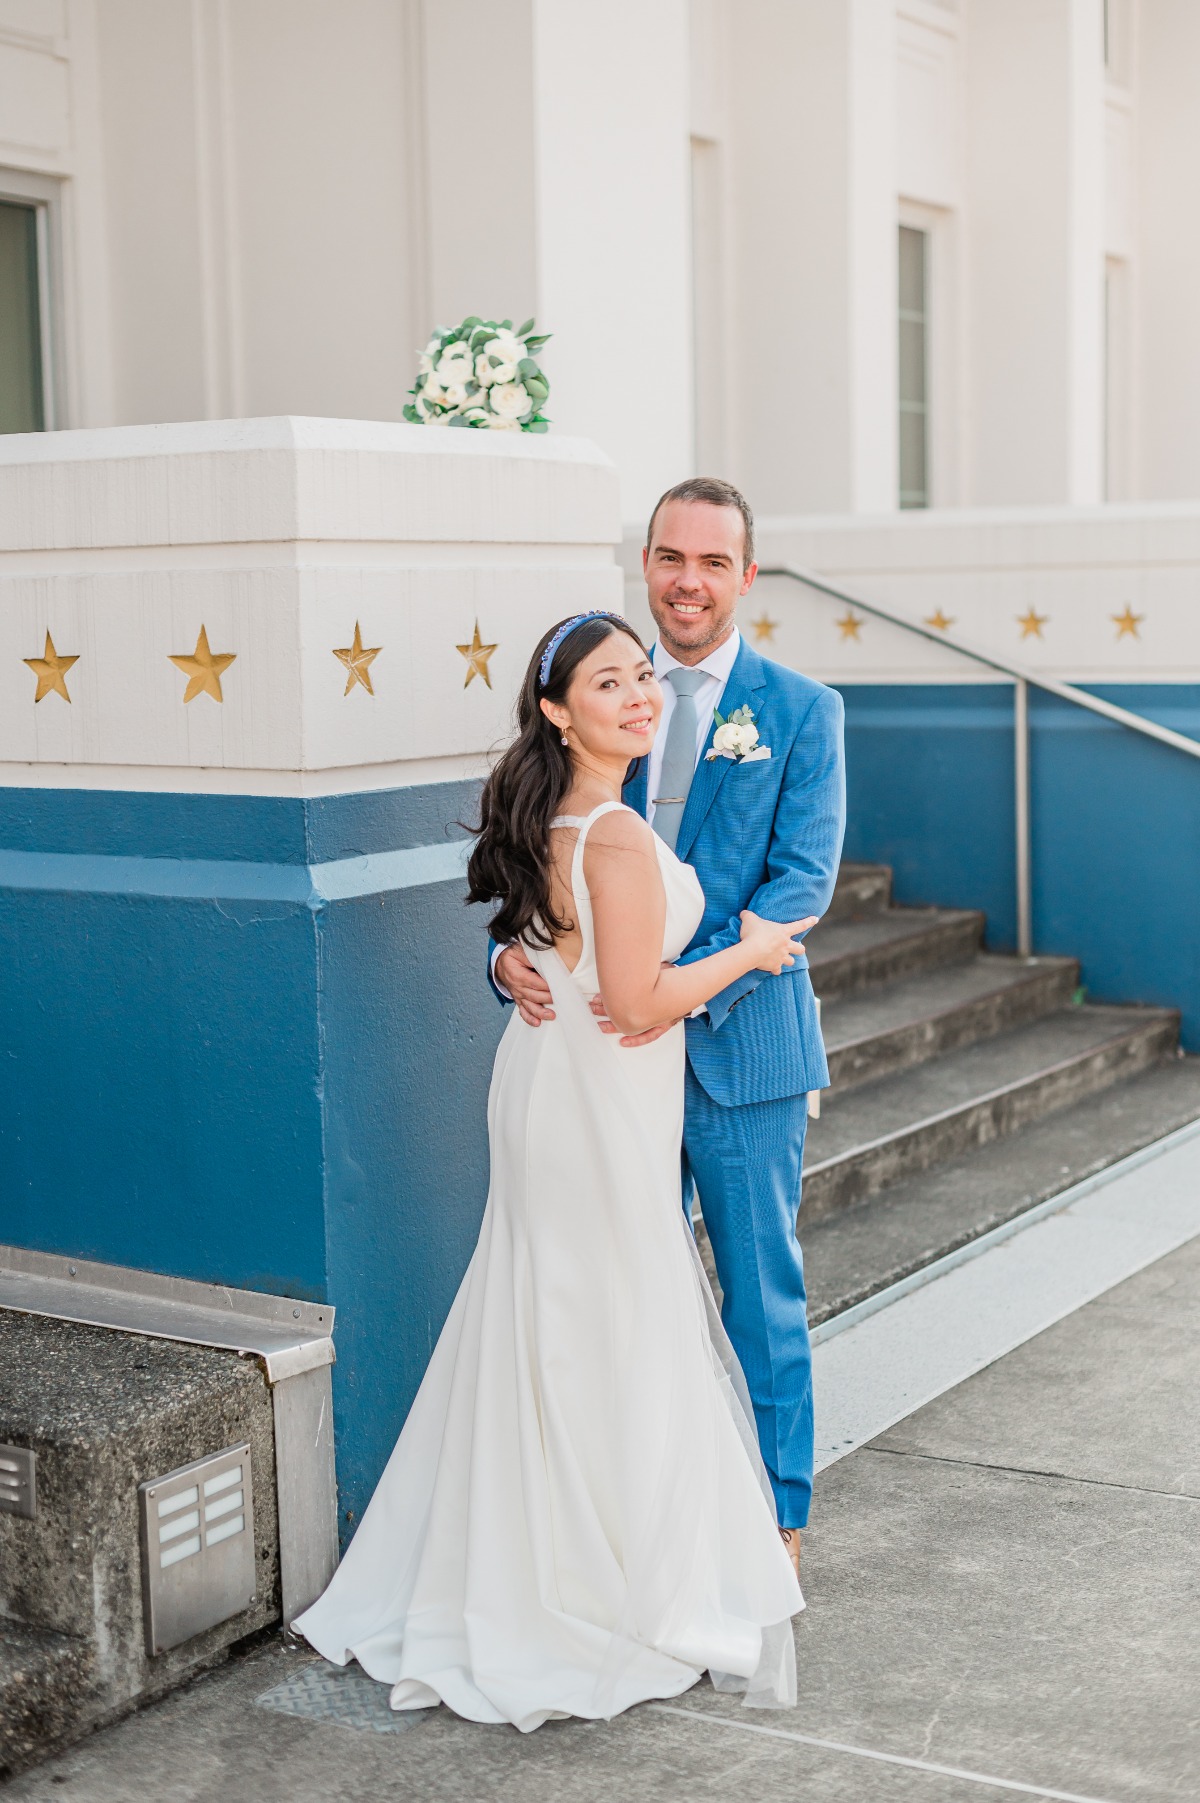 Nautical wedding couple with blue accents 